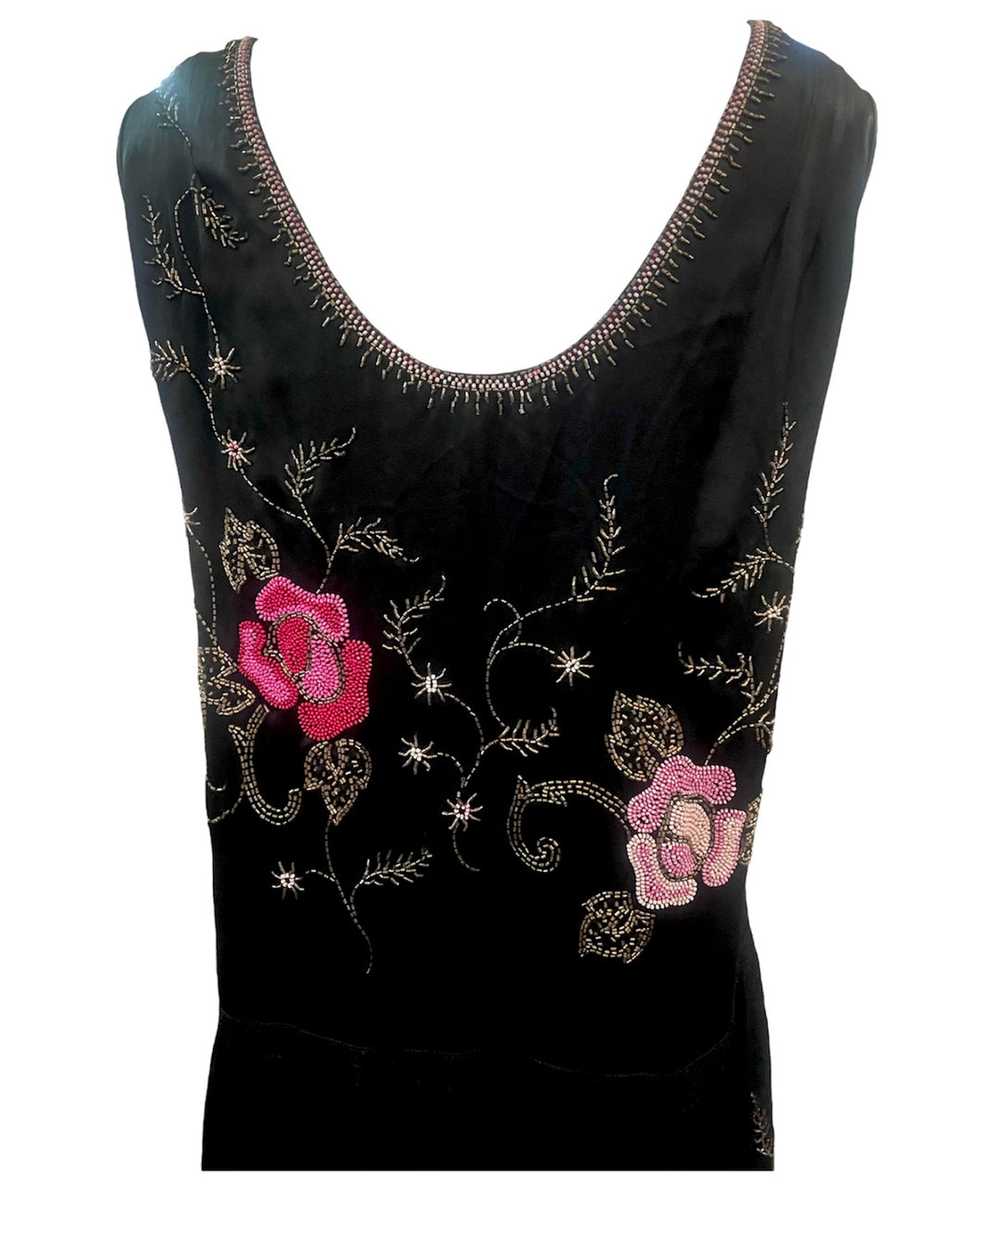 20s Satin Floral Beaded Dress with Scallop Hem - image 2